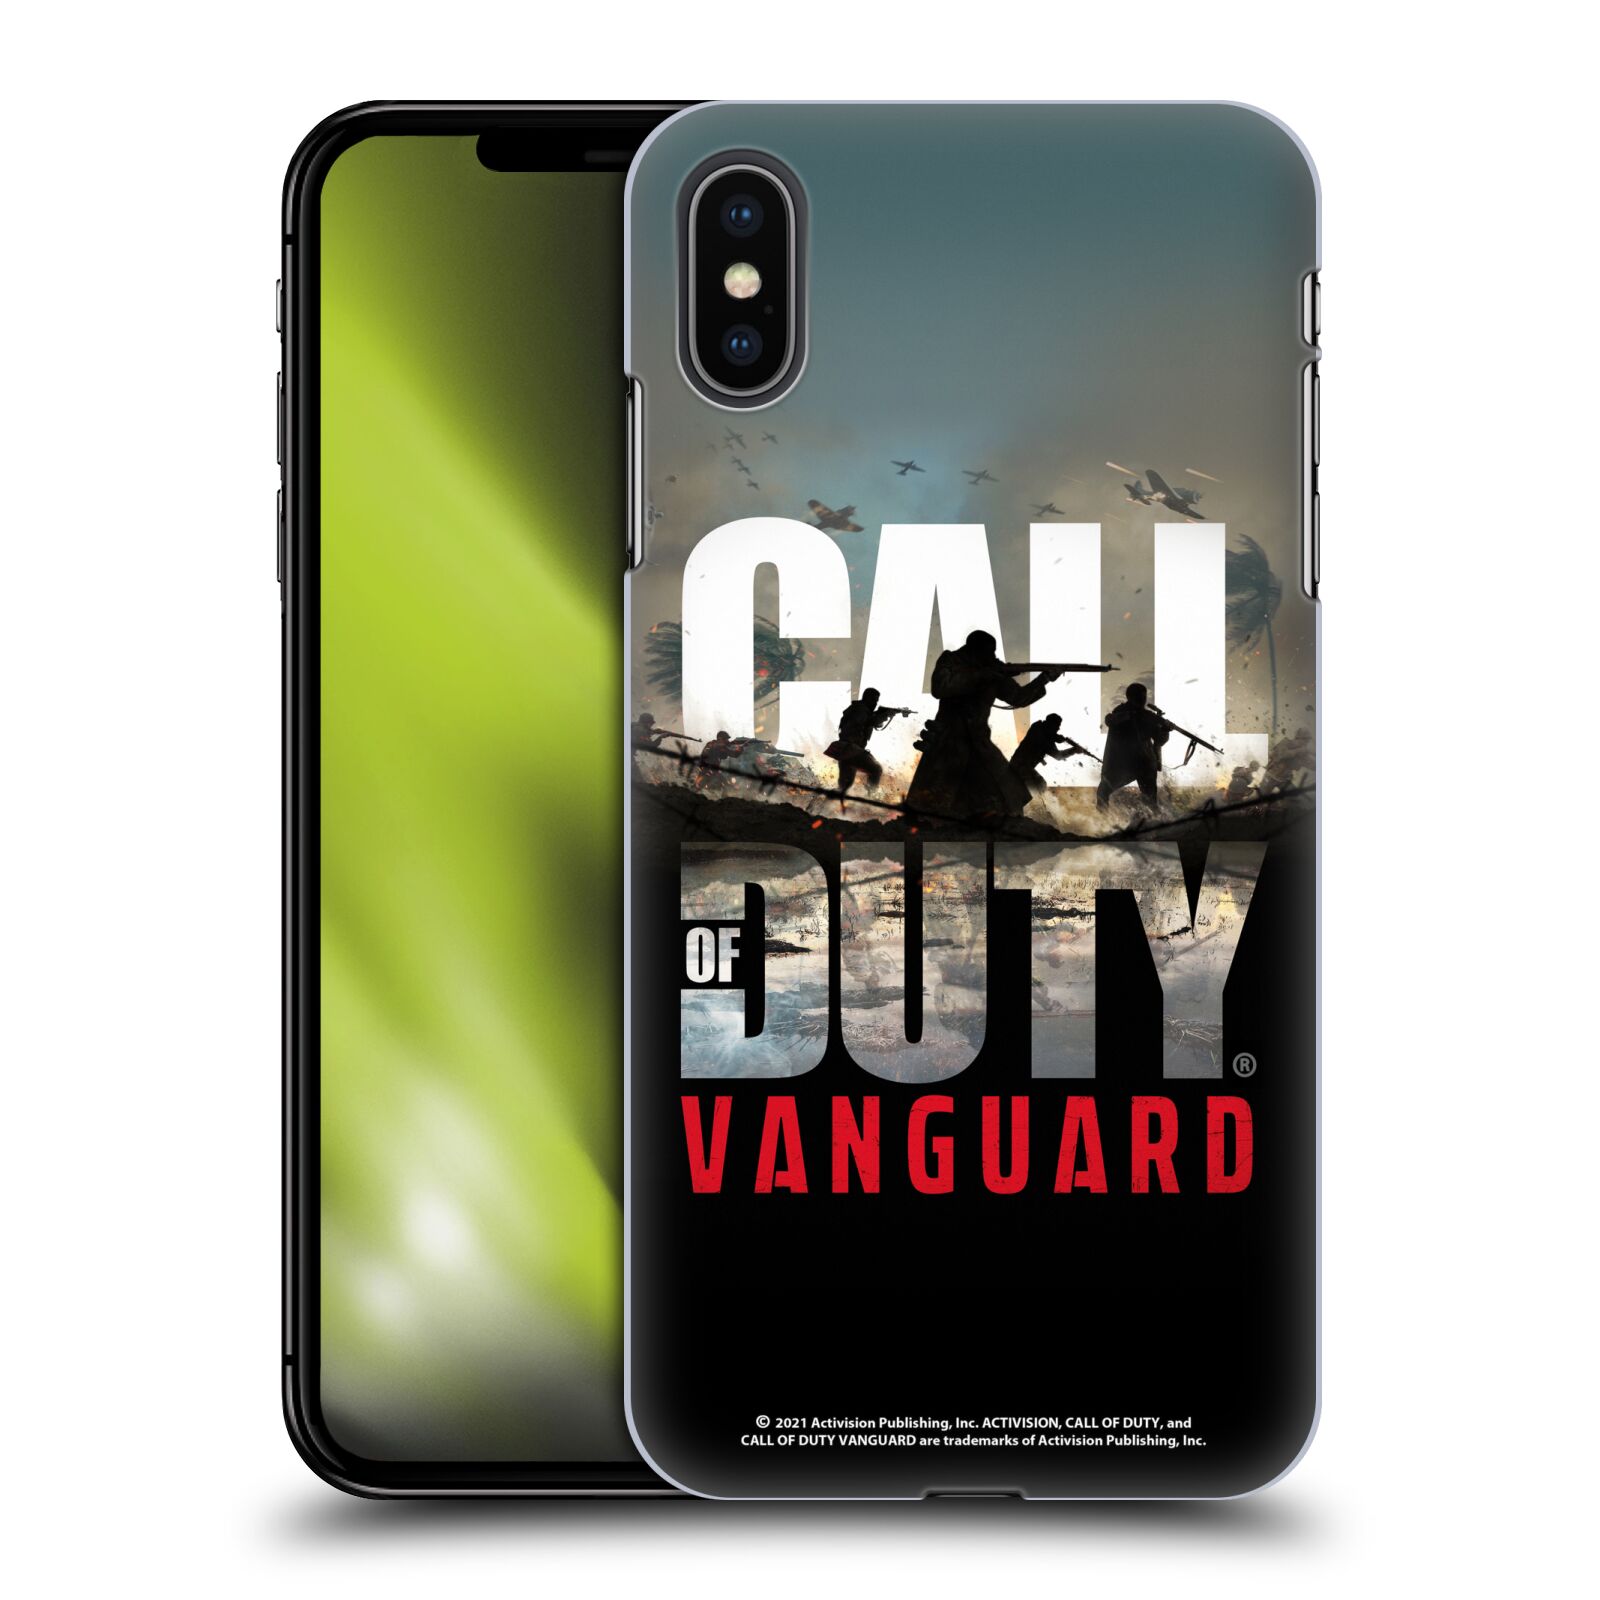 Zadní obal pro mobil Apple Iphone XS MAX - HEAD CASE - Call of Duty - Vanguard